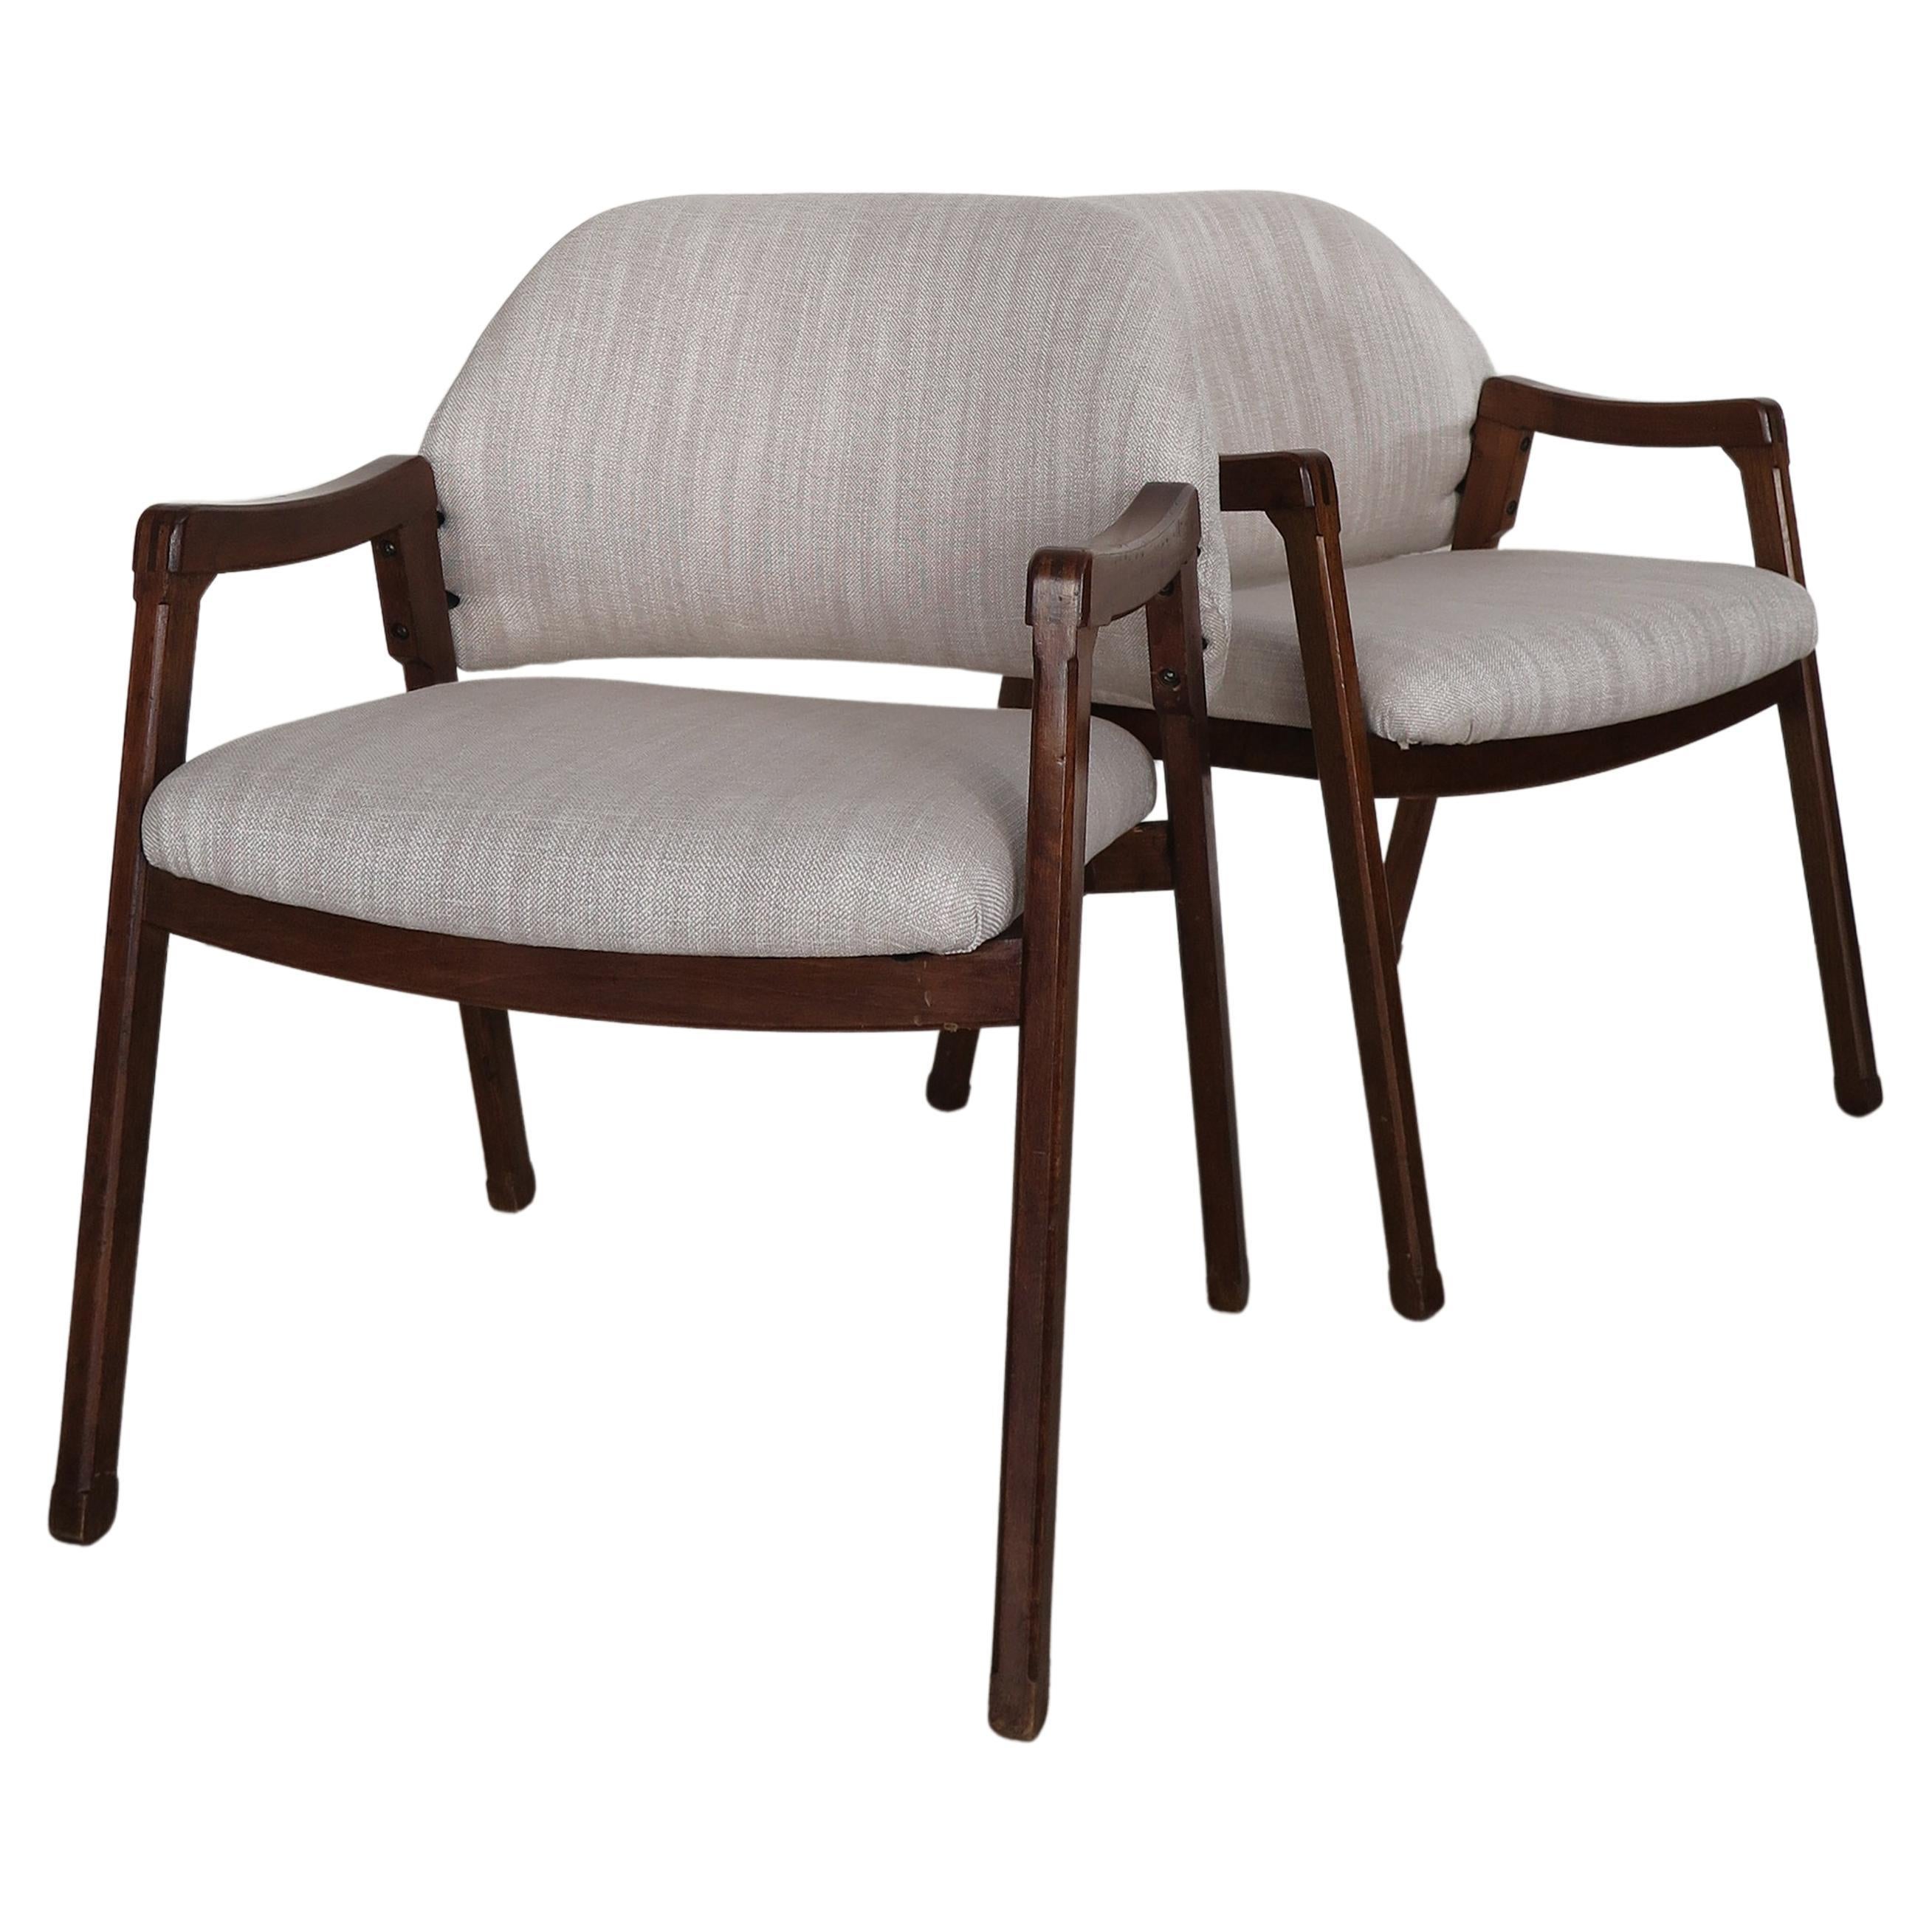 Ico Parisi Italian Midcentury Fabric Wood Armchair Model 814 for Cassina, 1960s For Sale